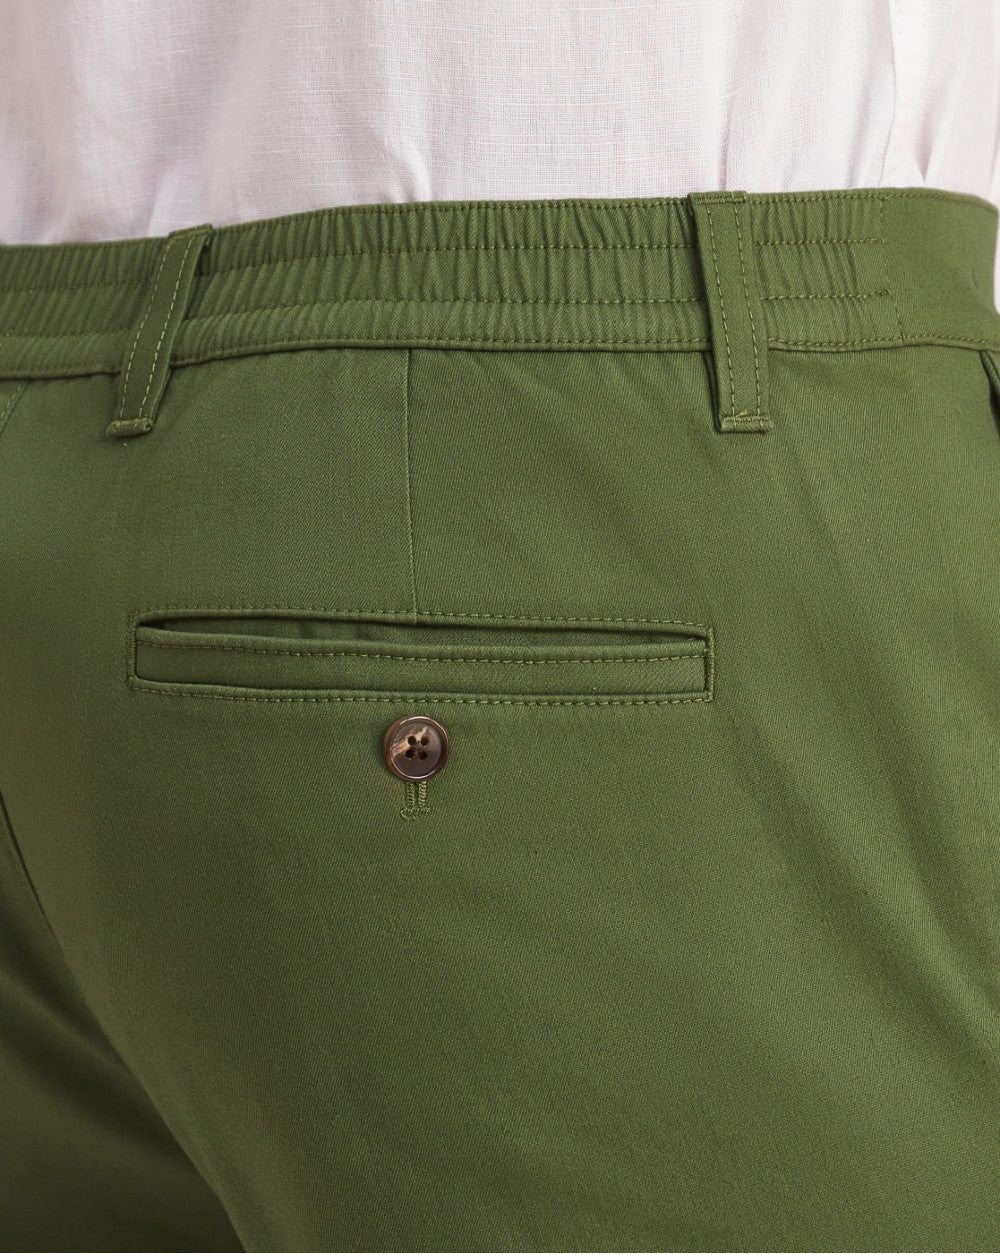 Slim Fit Elasticized Crossover Chinos - Chive Green